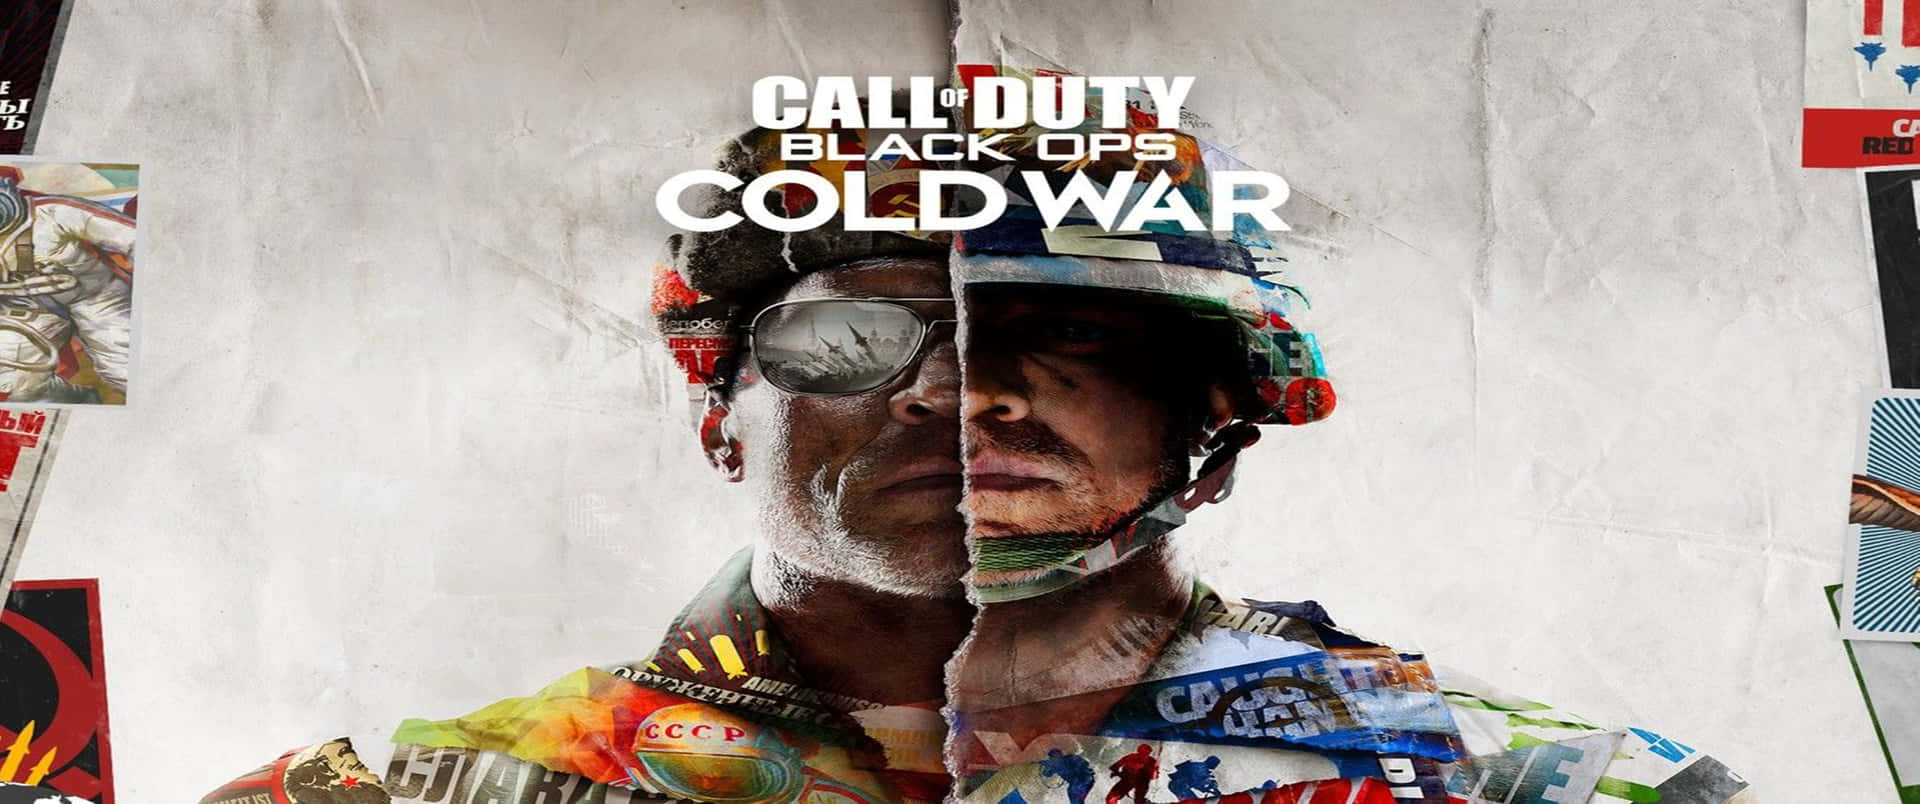 “Experience Epic Warfare with Call Of Duty Black Ops Cold War”